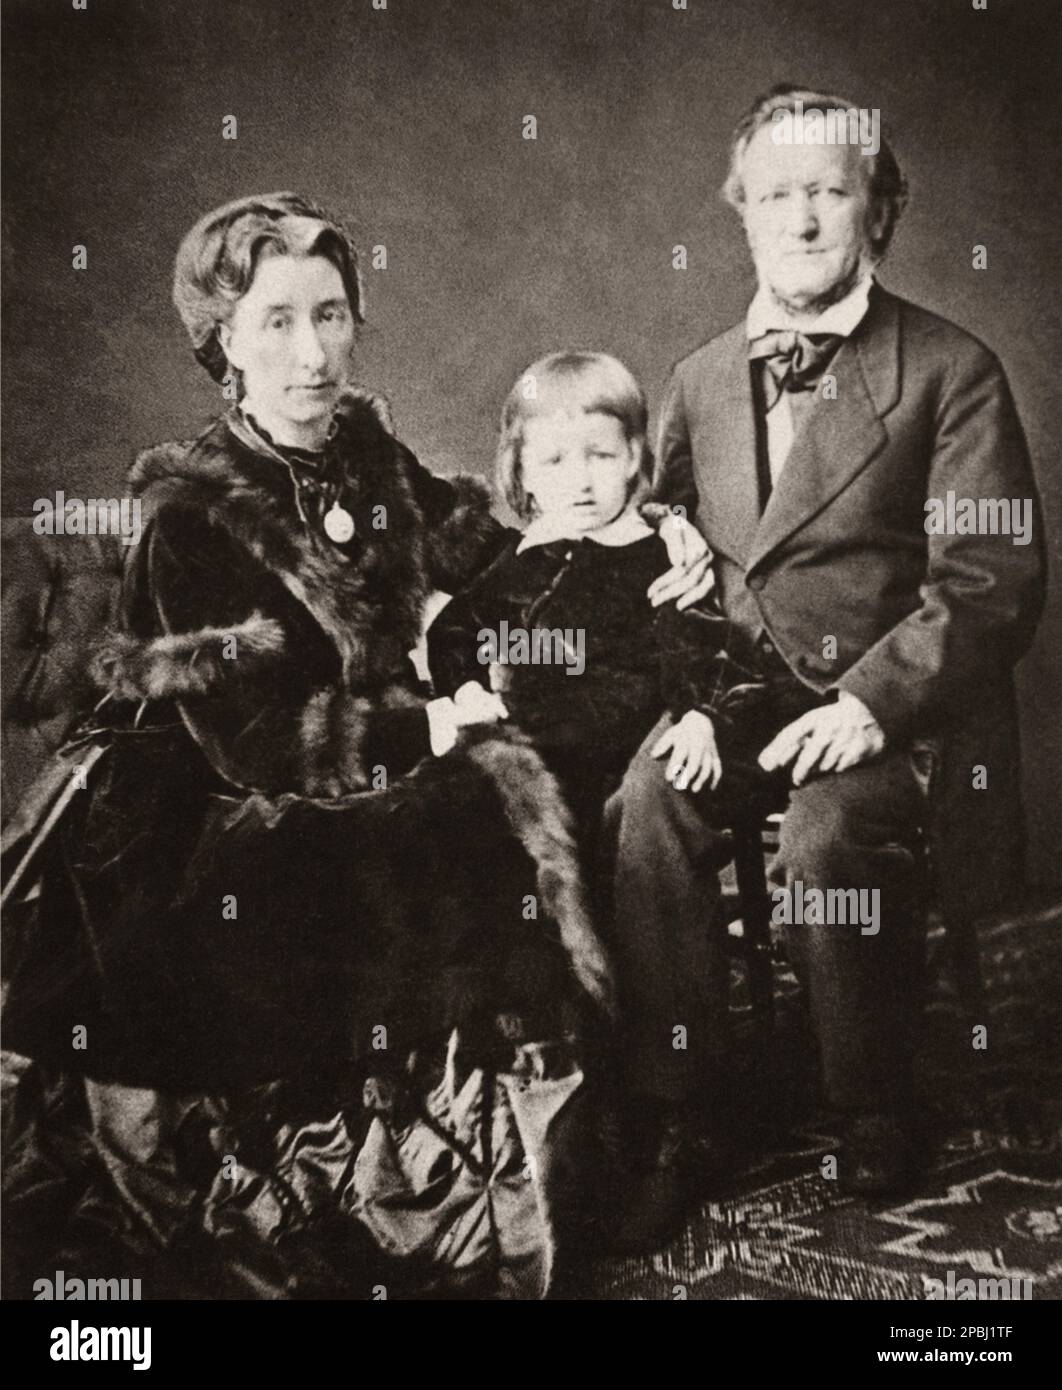 1873 ca : The german music composer RICHARD WAGNER ( 1813- 1883 ) with wife COSIMA WAGNER LISZT ( daughter of music composer Franz Liszt and countess Marie de Flavigny d' Agout , 1837 - 1930 ), married with music conductor Hans Von Bulow , close friend of Wagner . In this photo with the son SIEGFRIED WAGNER ( 1869 - 1930 ) , future celebrated music composer  - MUSIC - CLASSICAL - MUSICA CLASSICA - LIRICA - OPERA - BAVARIA - BAVIERA - compositore - musicista - portrait - ritratto - lovers - amanti - COMPOSITORE - OPERA LIRICA  - MUSICISTA   - collar - colletto  - CRAVATTA - TIE - -- ARCHIVIO GB Stock Photo